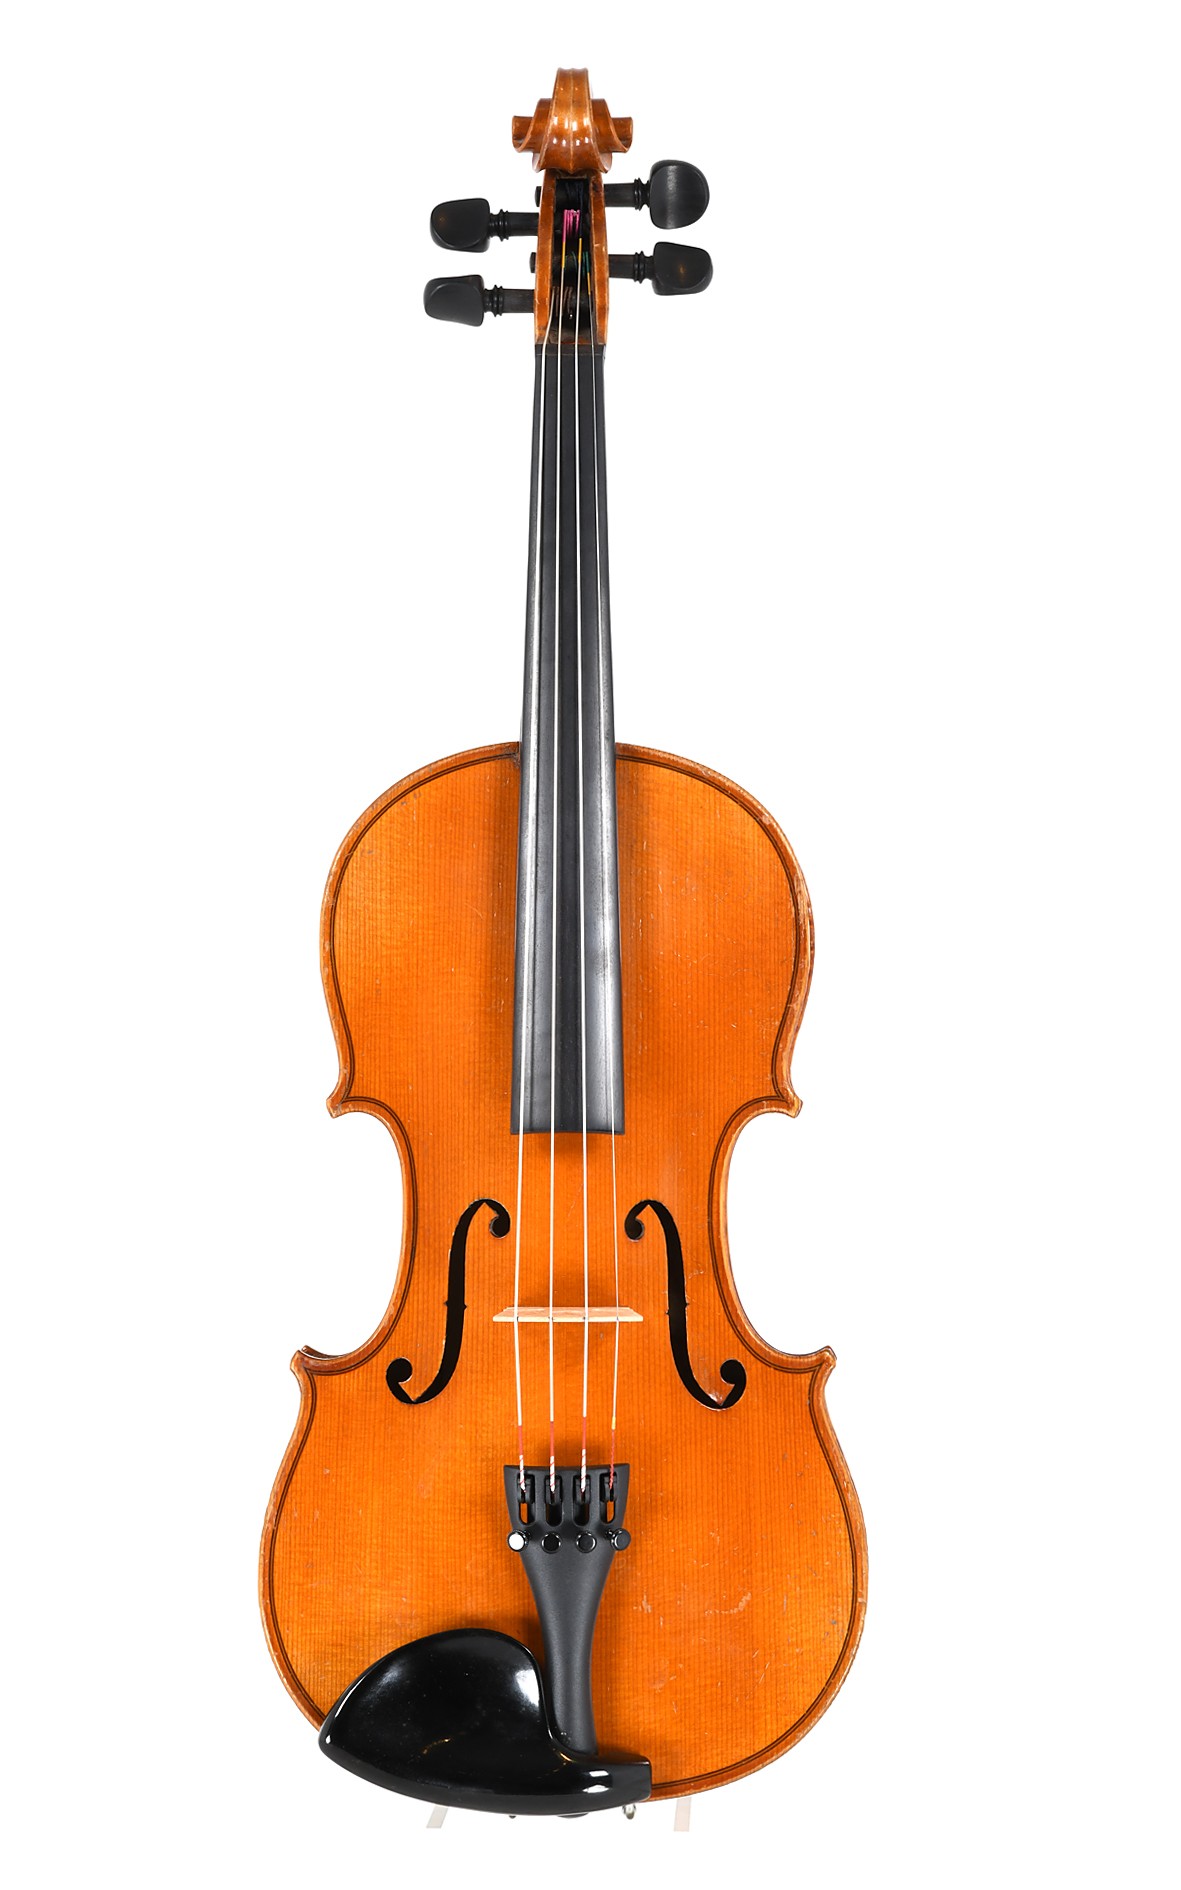 Fine French 3/4 violin, approx. 1910 - top view